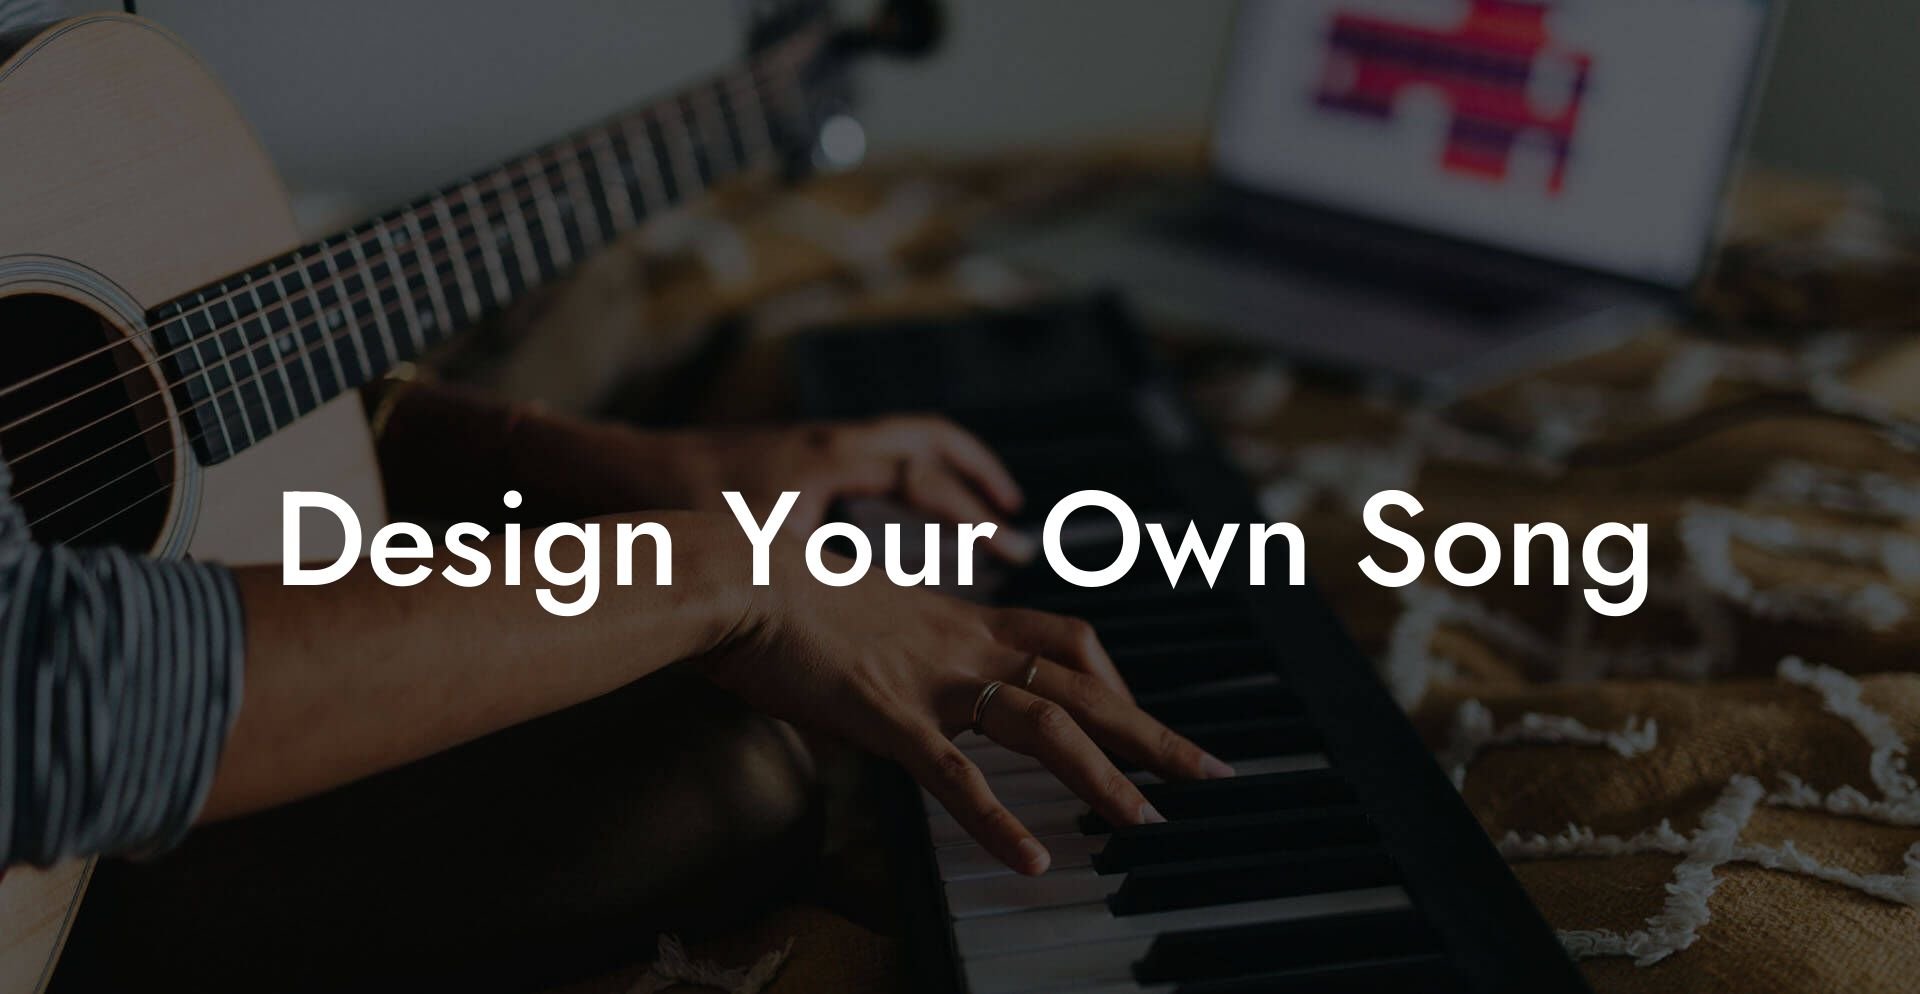 design your own song lyric assistant